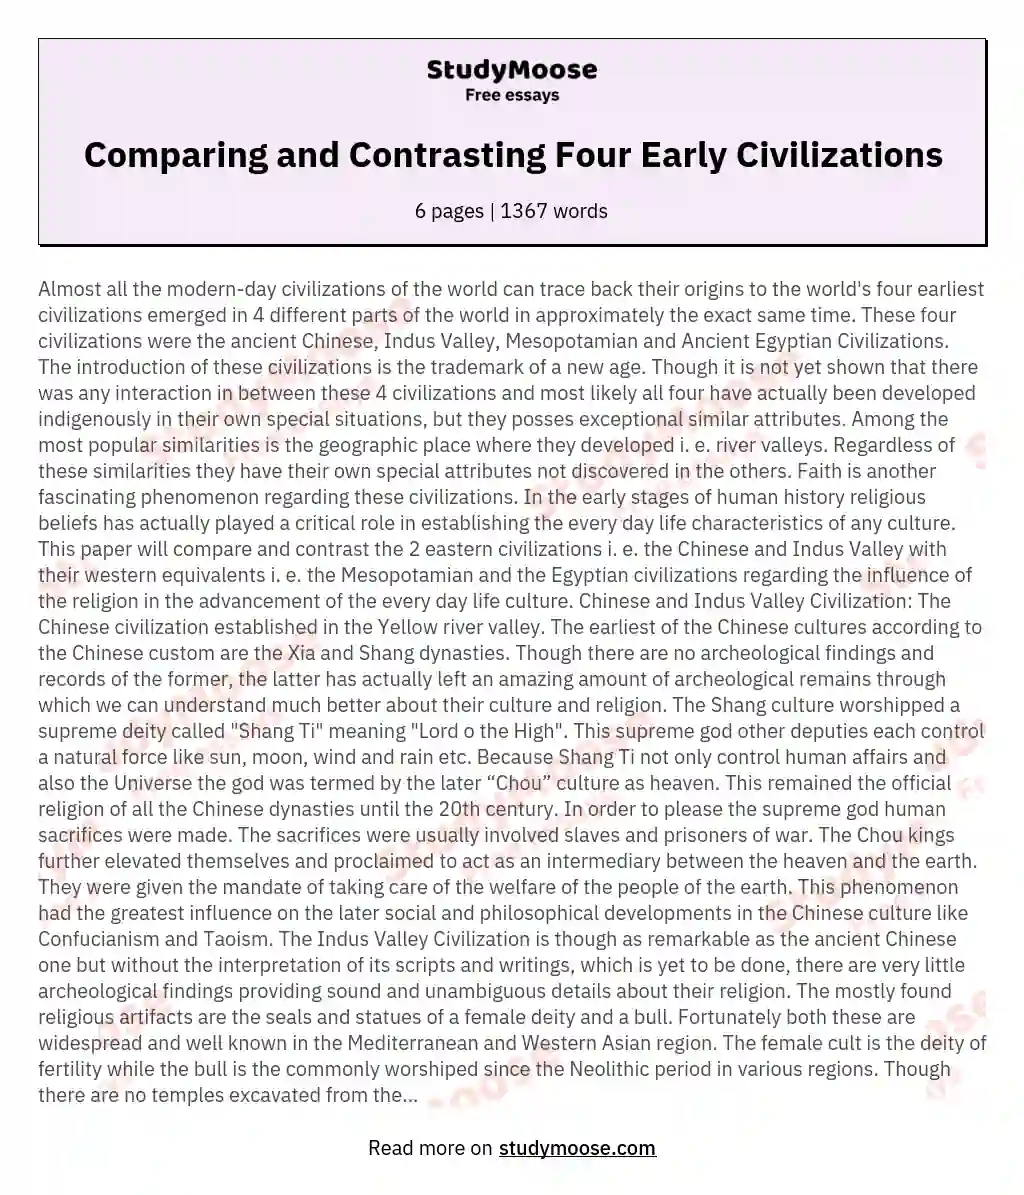 Comparing and Contrasting Four Early Civilizations essay